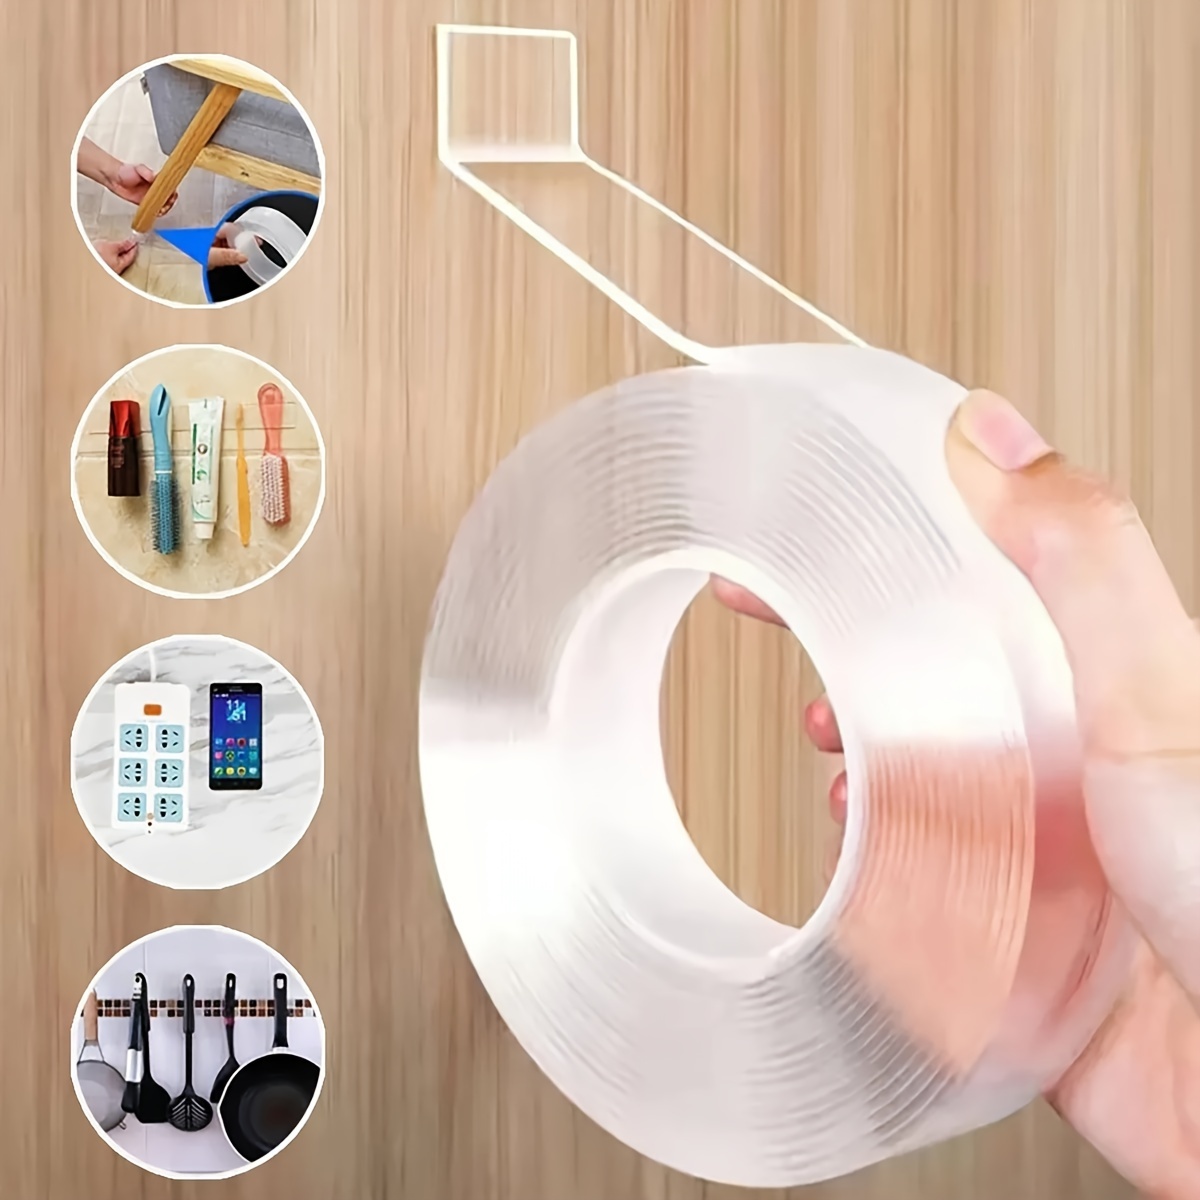 Nano Tape Double Sided Tape Waterproof Strong Adhesive Tape